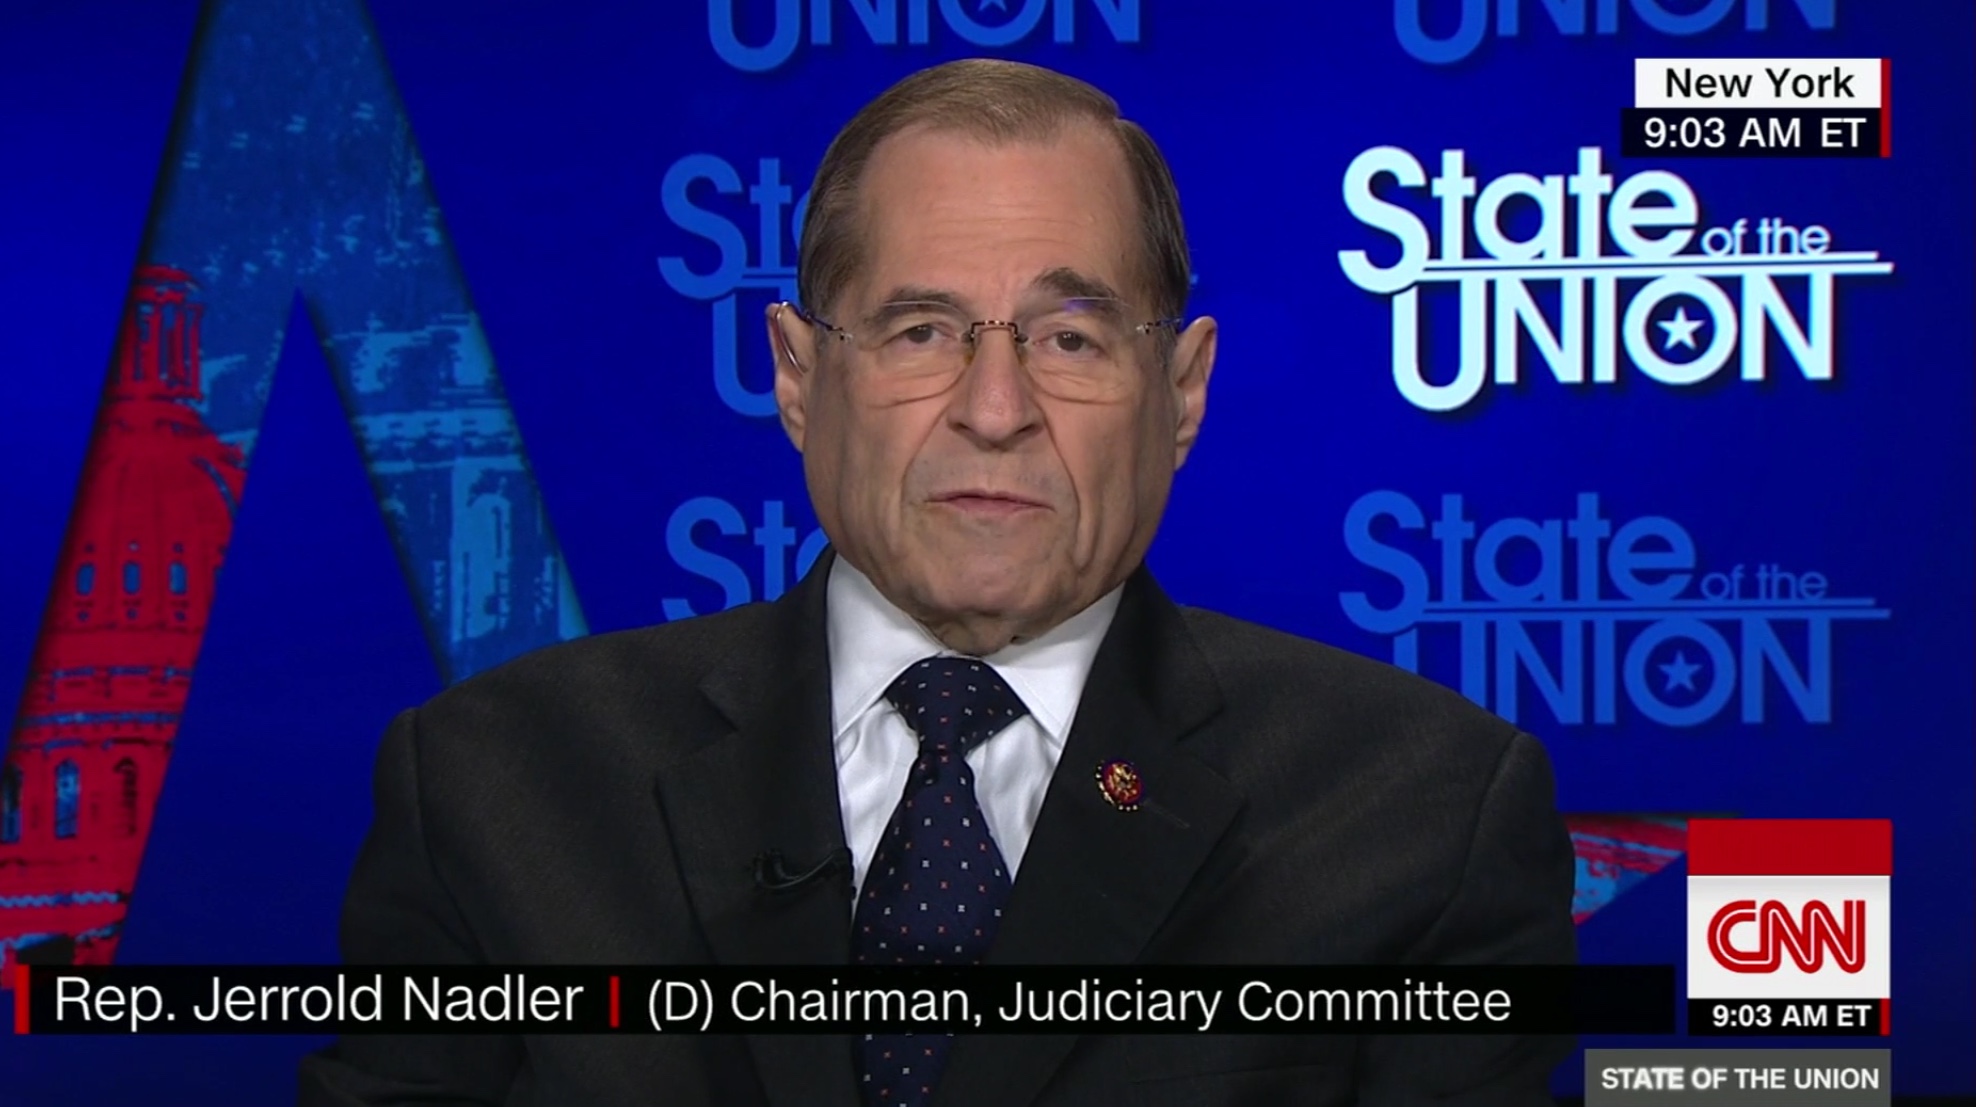 NY Democratic Rep. Jerry Nadler appears on CNN’s “State of the Union,” Apr. 14, 2019. CNN screenshot.